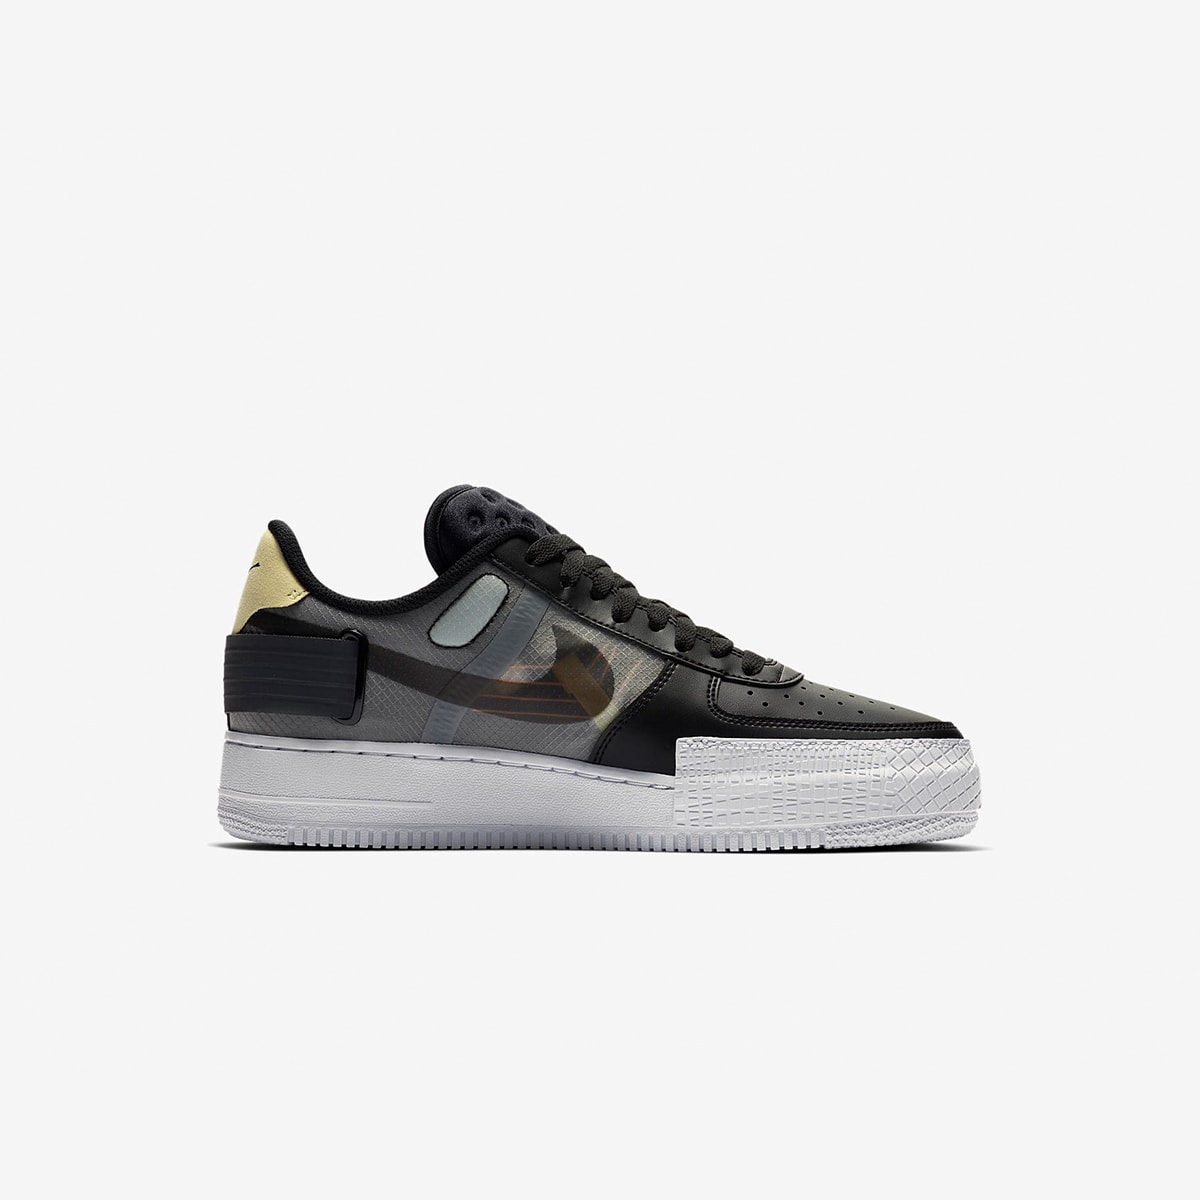 Nike Air Force 1 'Type' (Black, Anthracite & Zinnia) | END. Launches